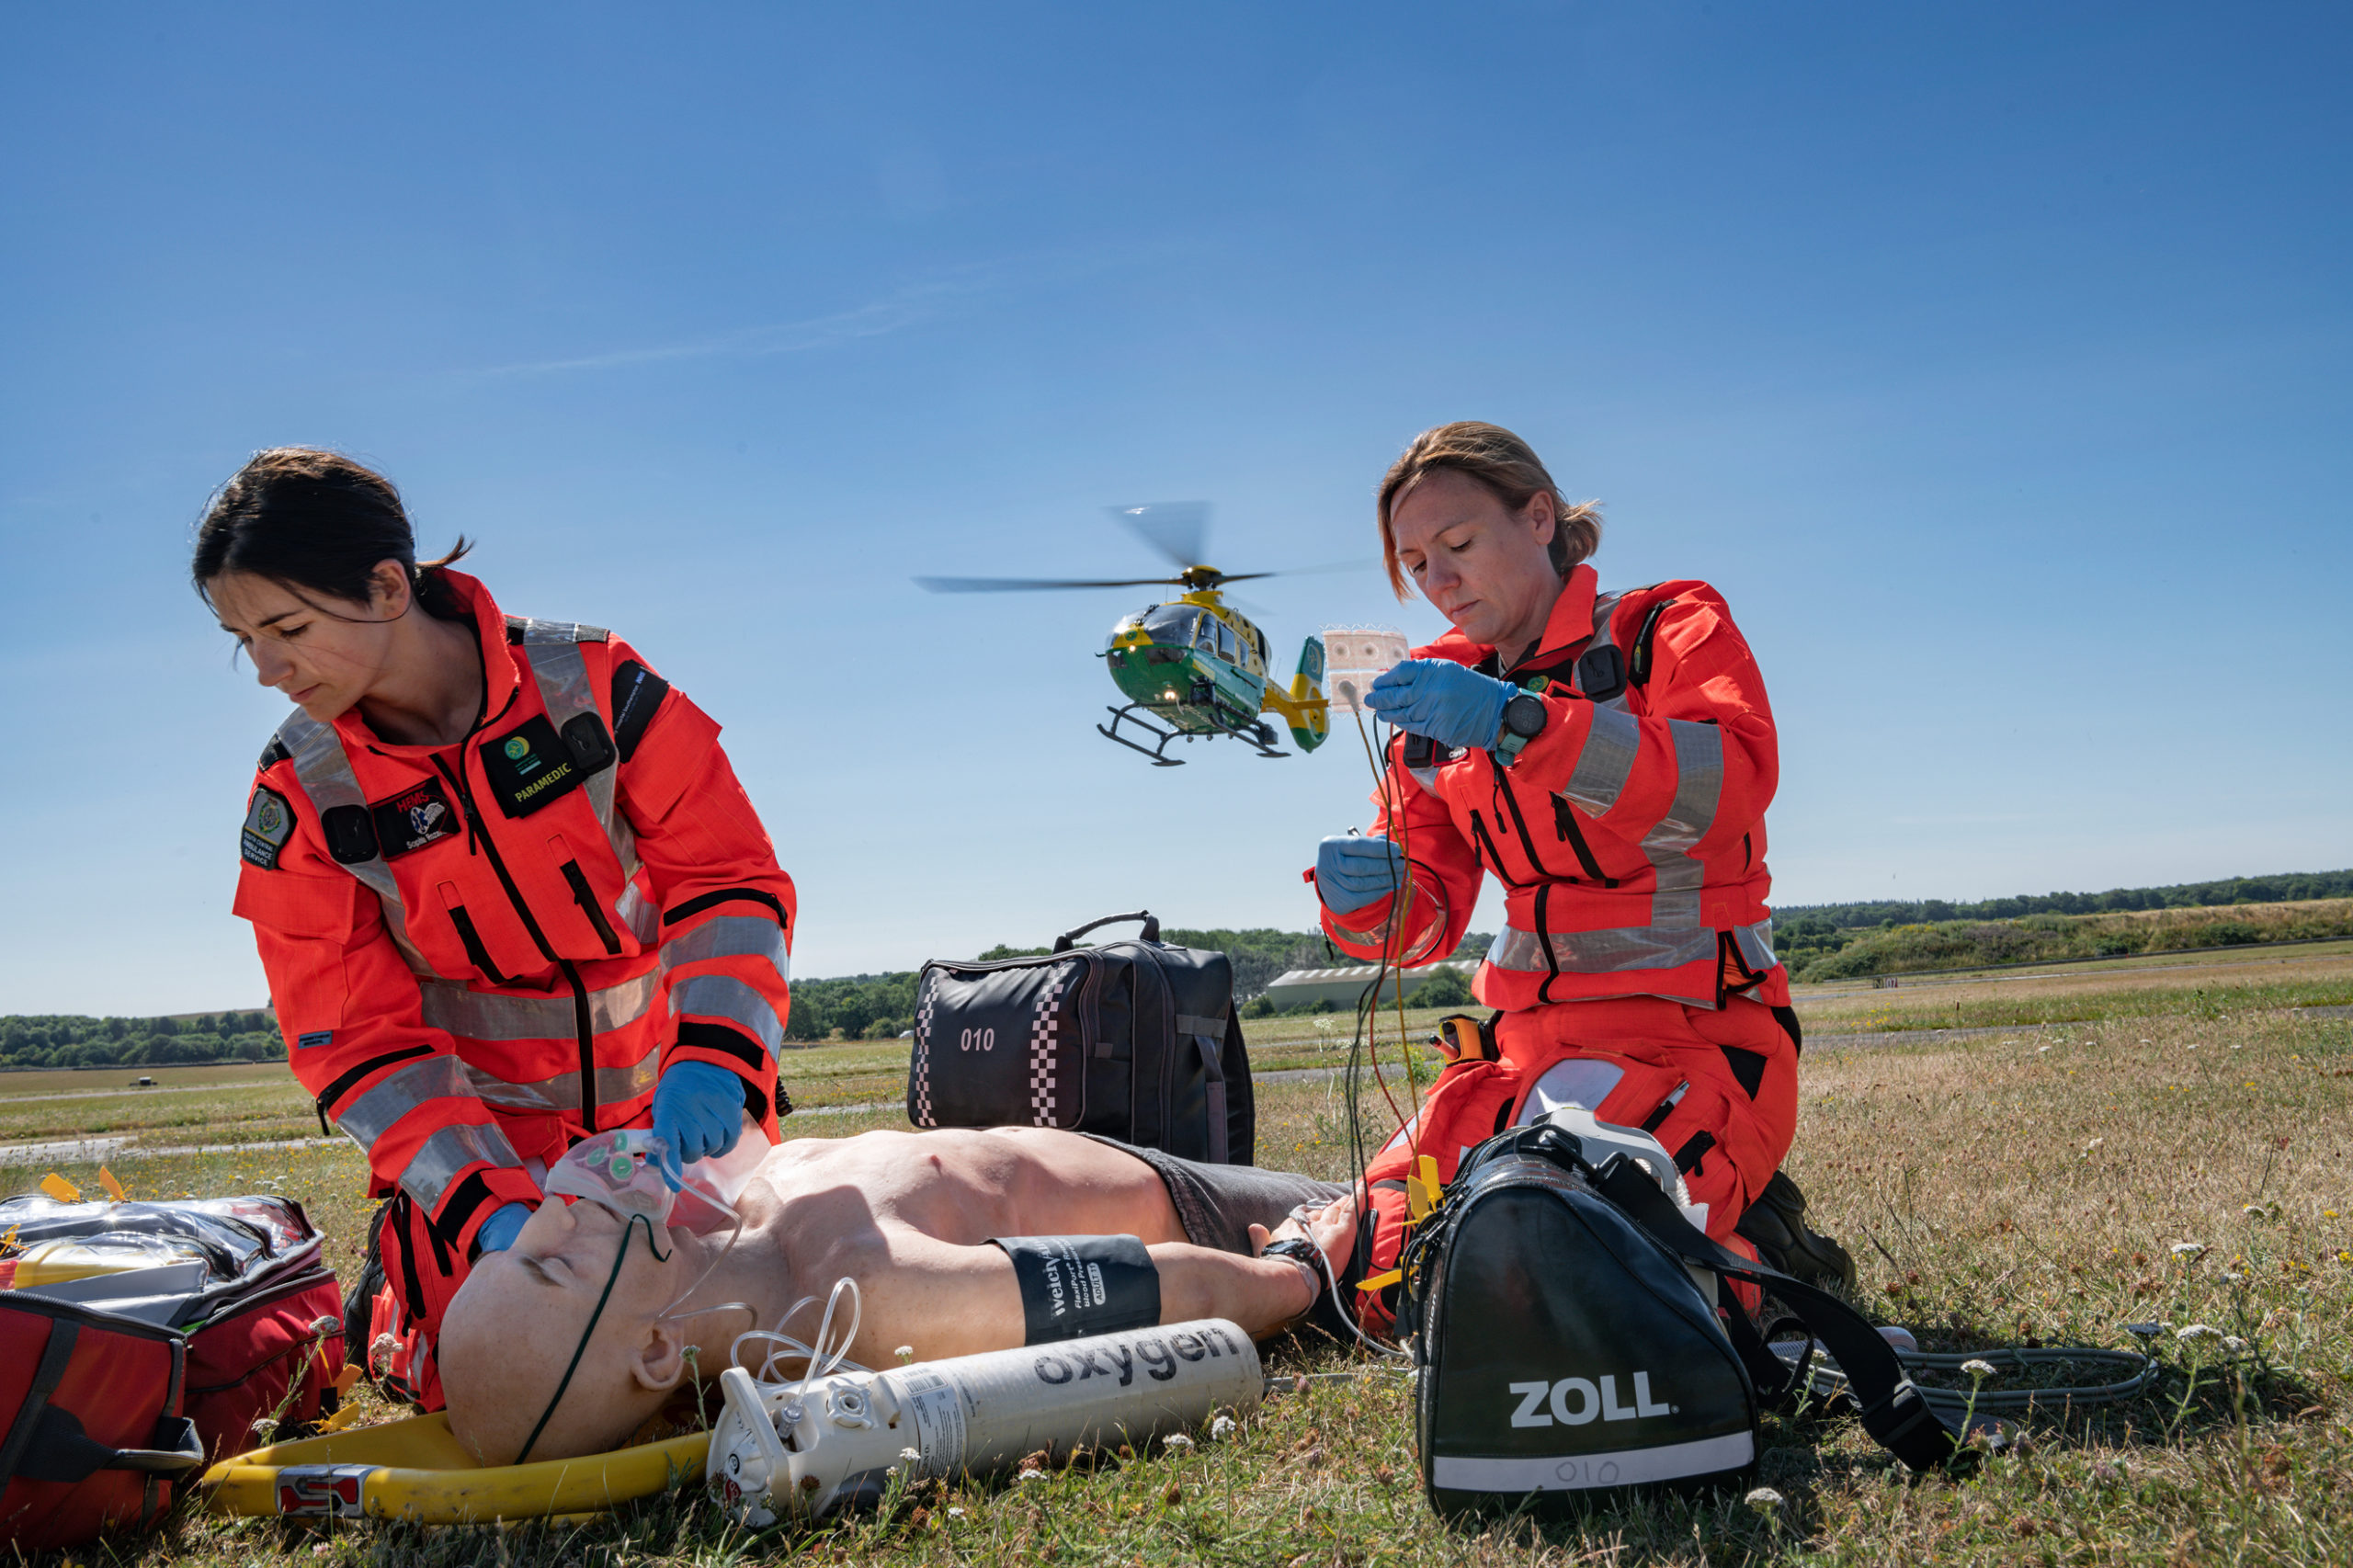 HEMS Paramedic's Clare Fitchett and Sophia Rozario taking part in a training simulation.